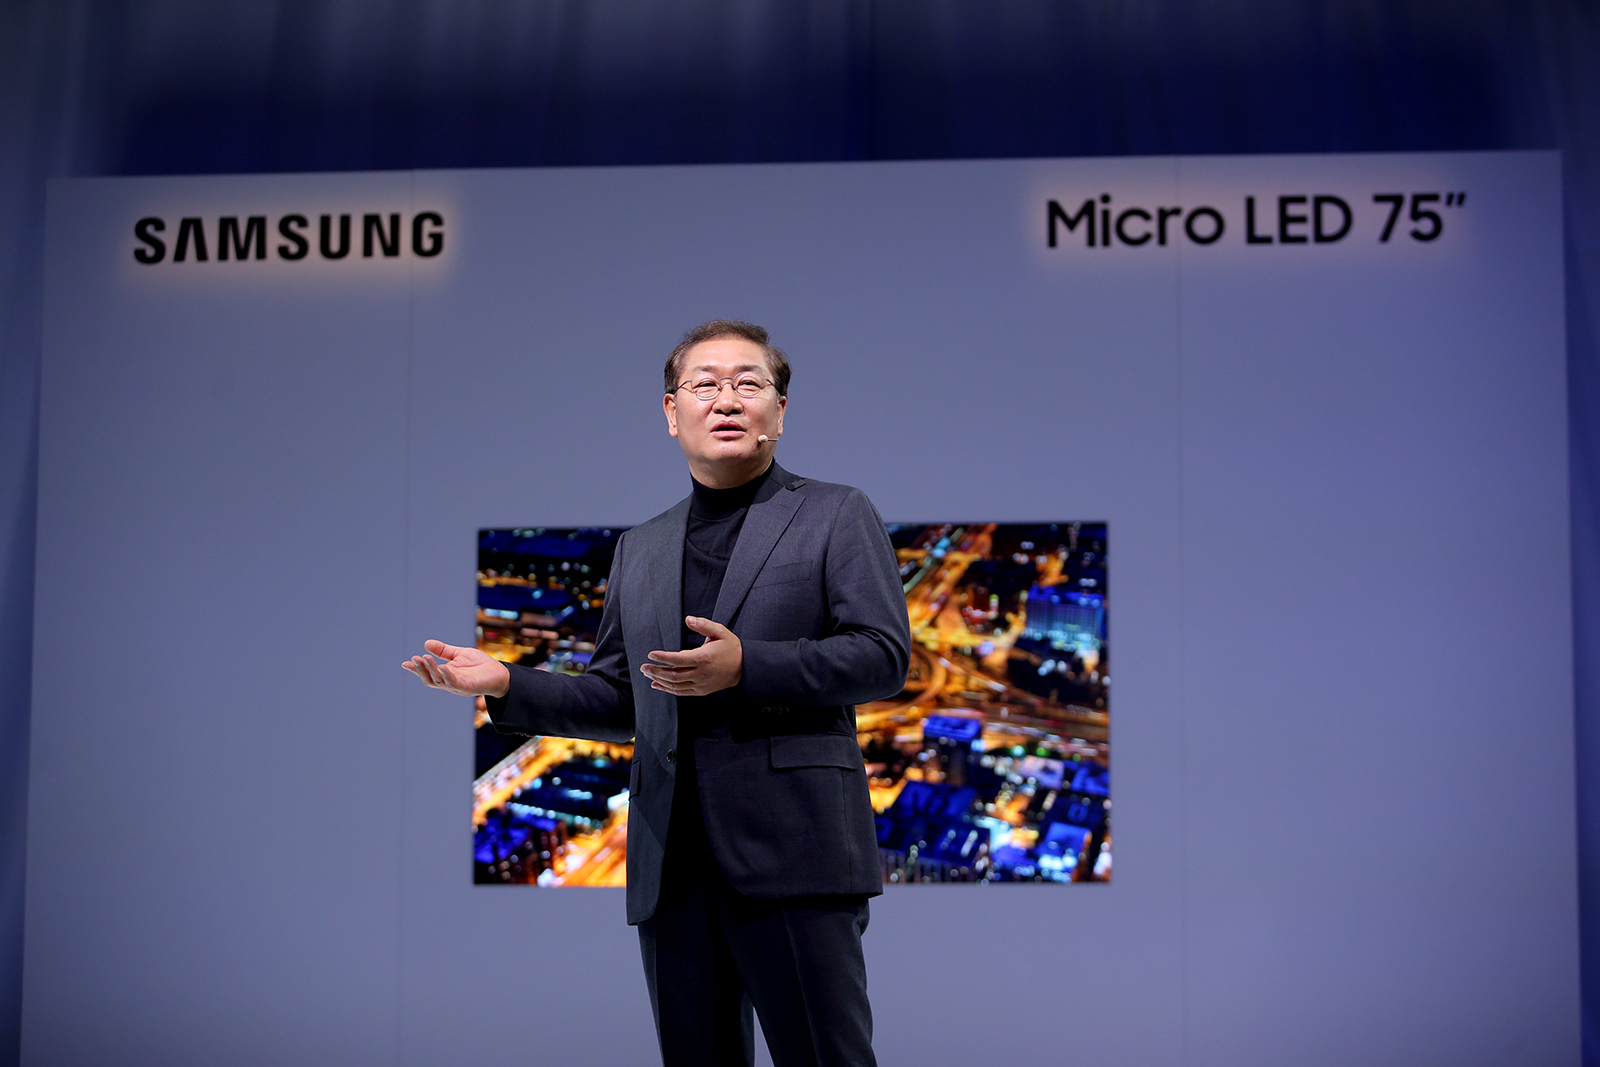 Samsung unveils living room-friendly 75-inch Micro LED TV at CES